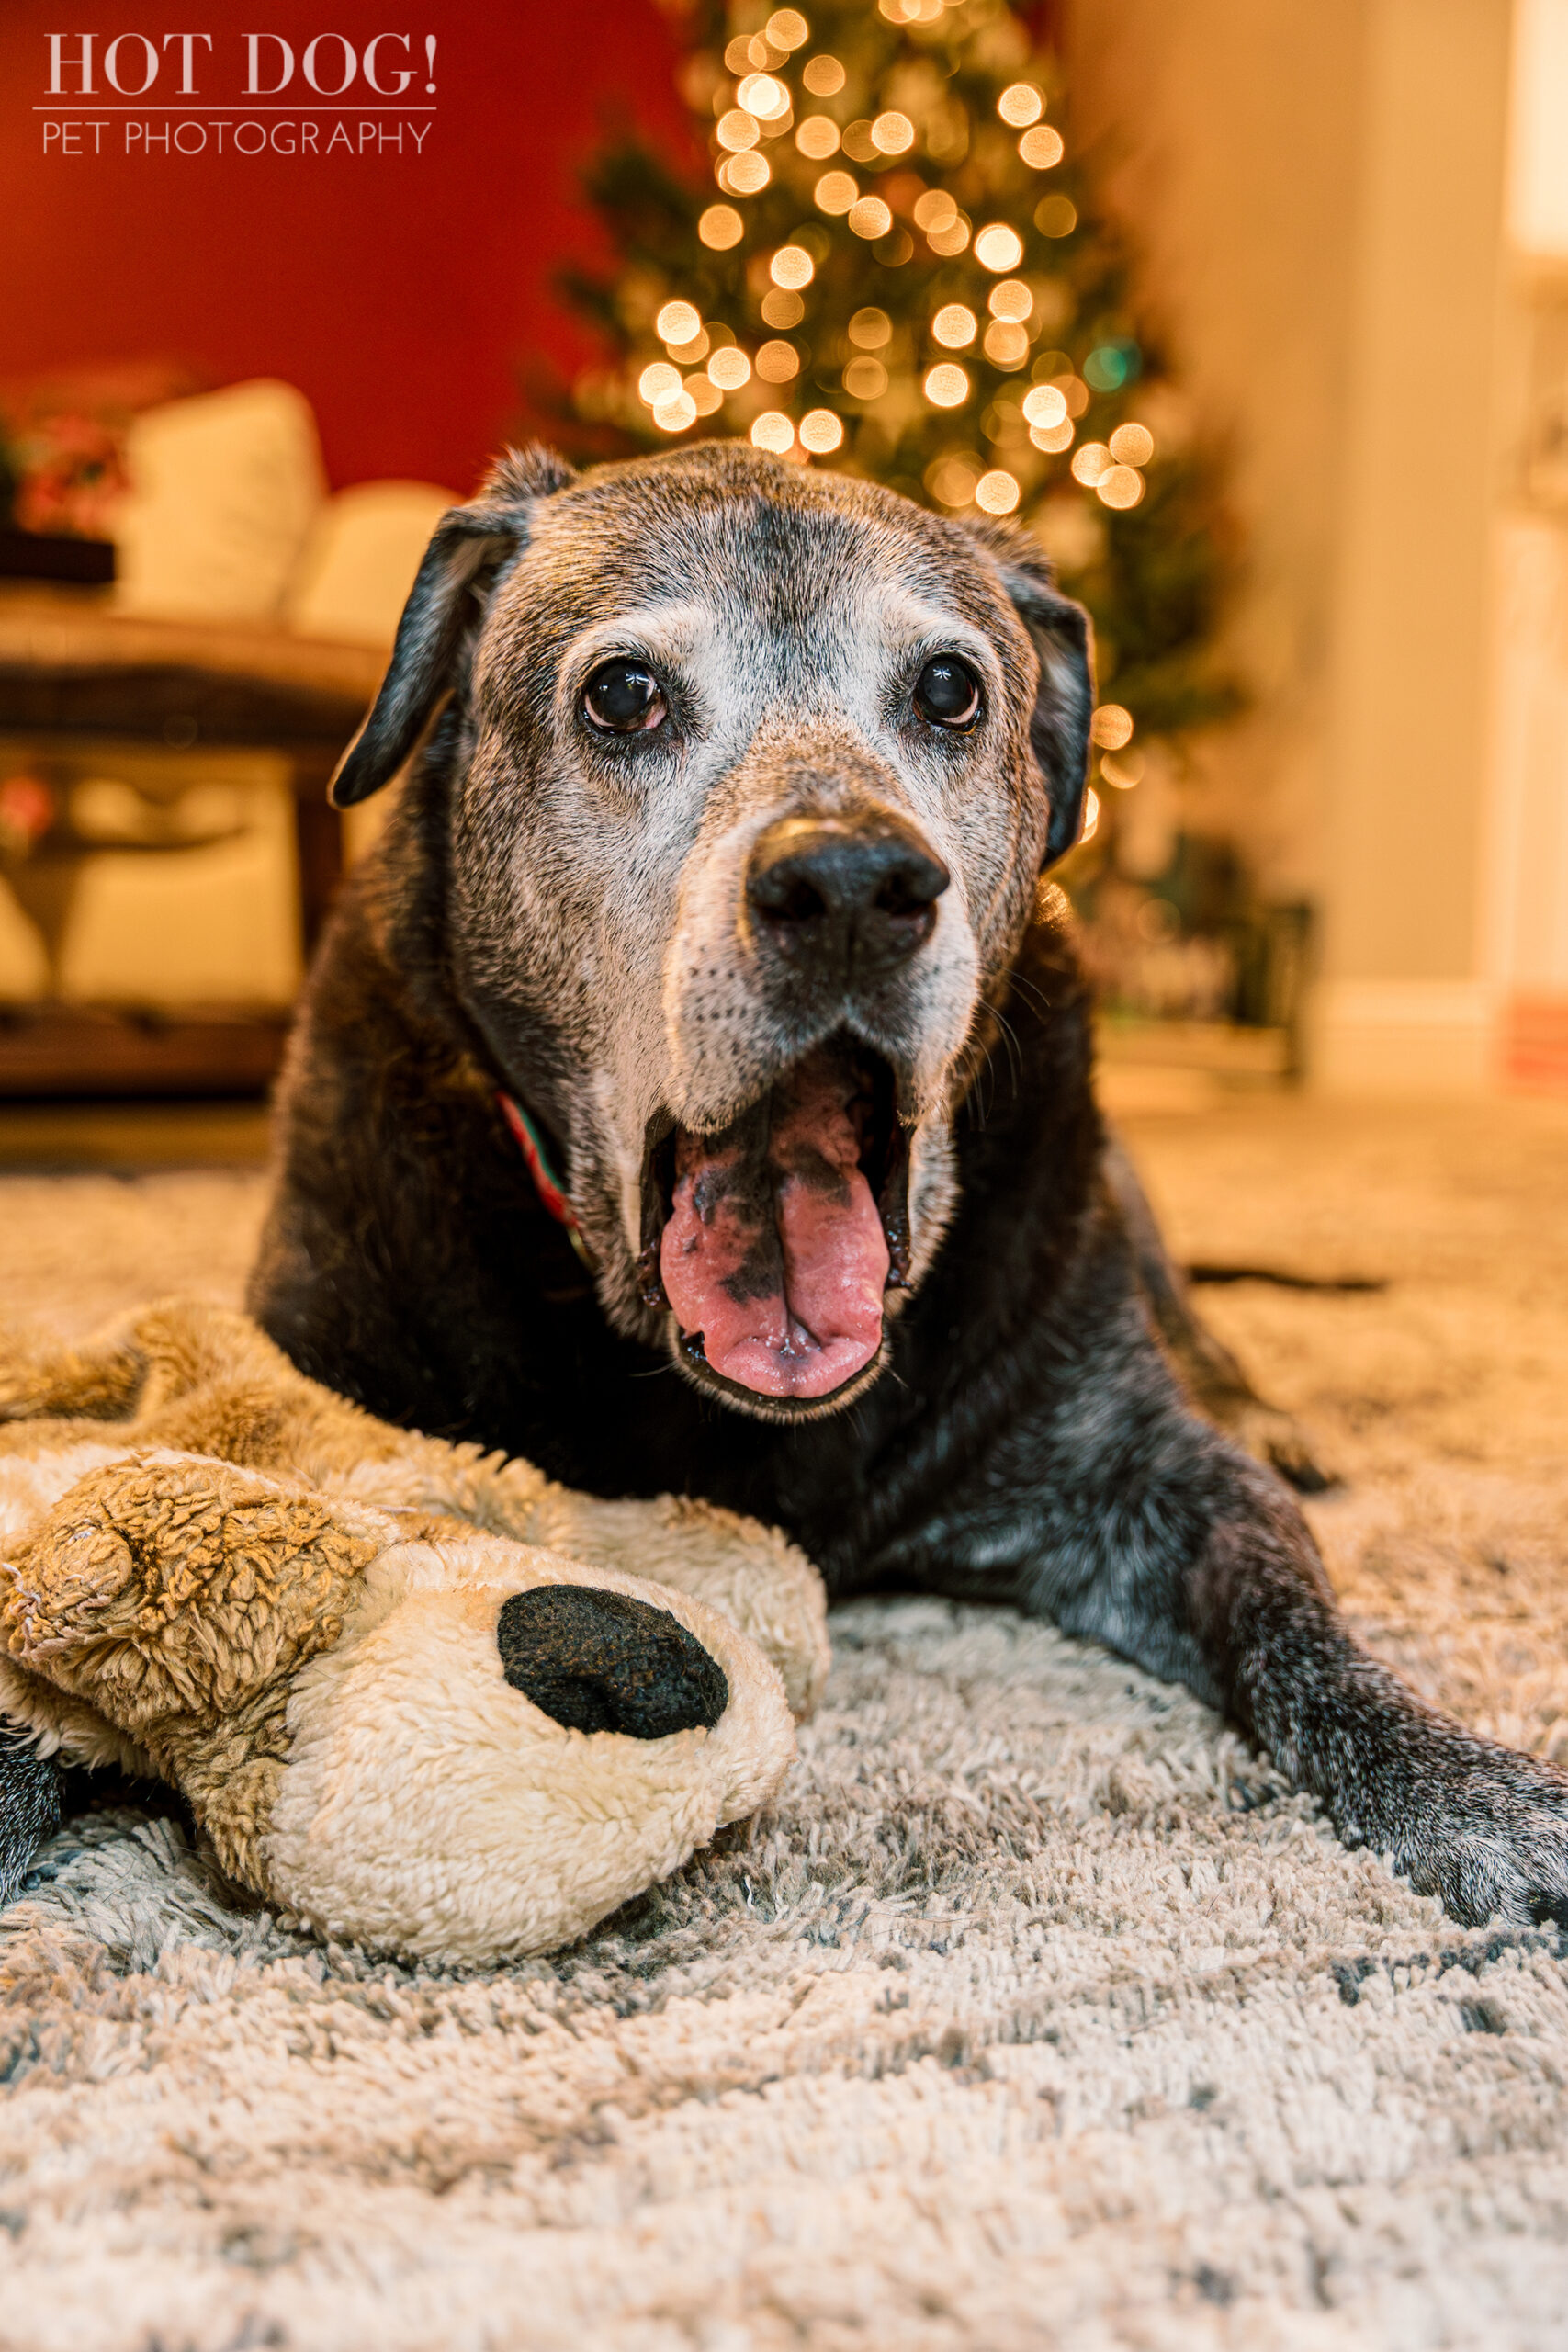 Nap Time by the Tree! Lambeau yawns before a cozy nap beneath a brightly lit Christmas tree. (Photo by Hot Dog! Pet Photography)